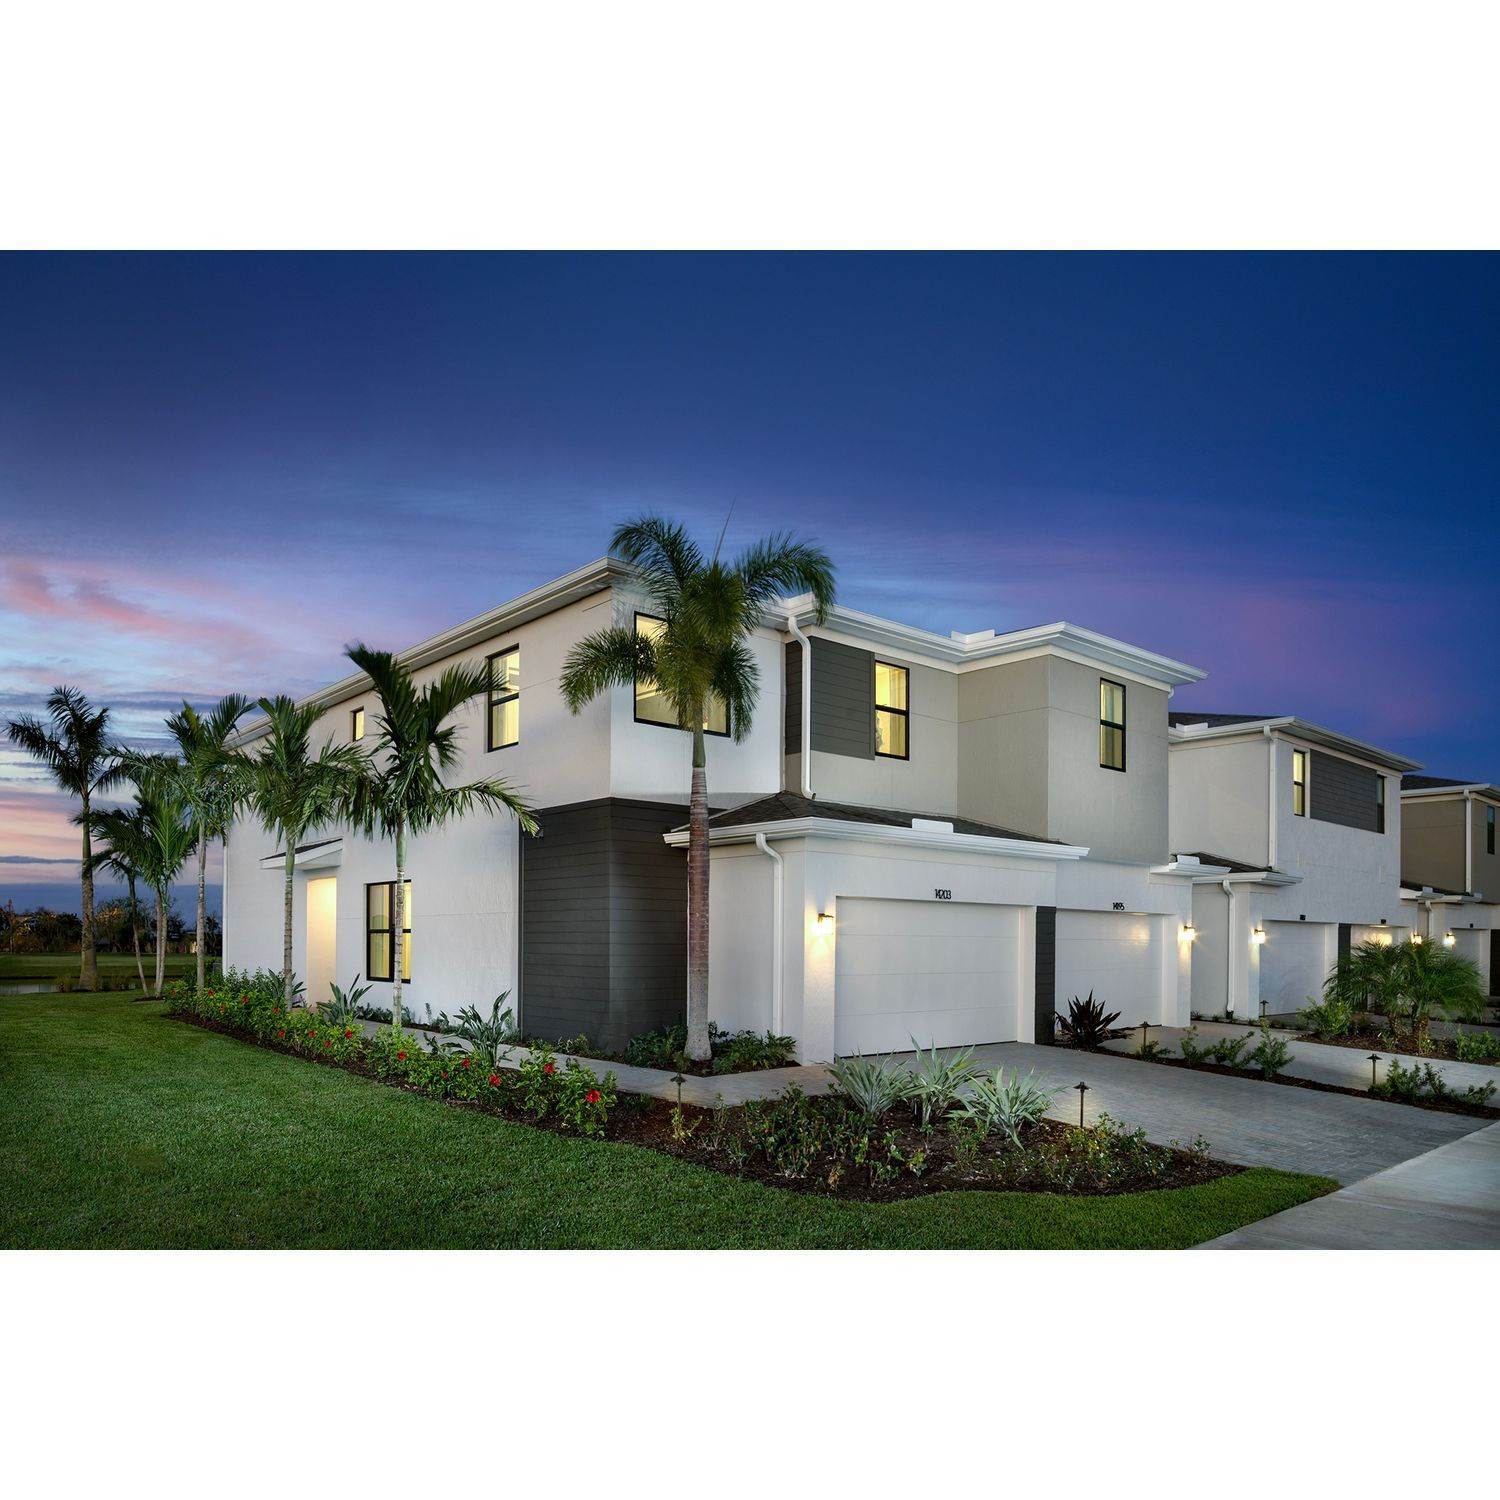 12. Tradition - Cadence - Townhomes Gebäude bei 10455 SW Orana Drive, Port St. Lucie, FL 34987